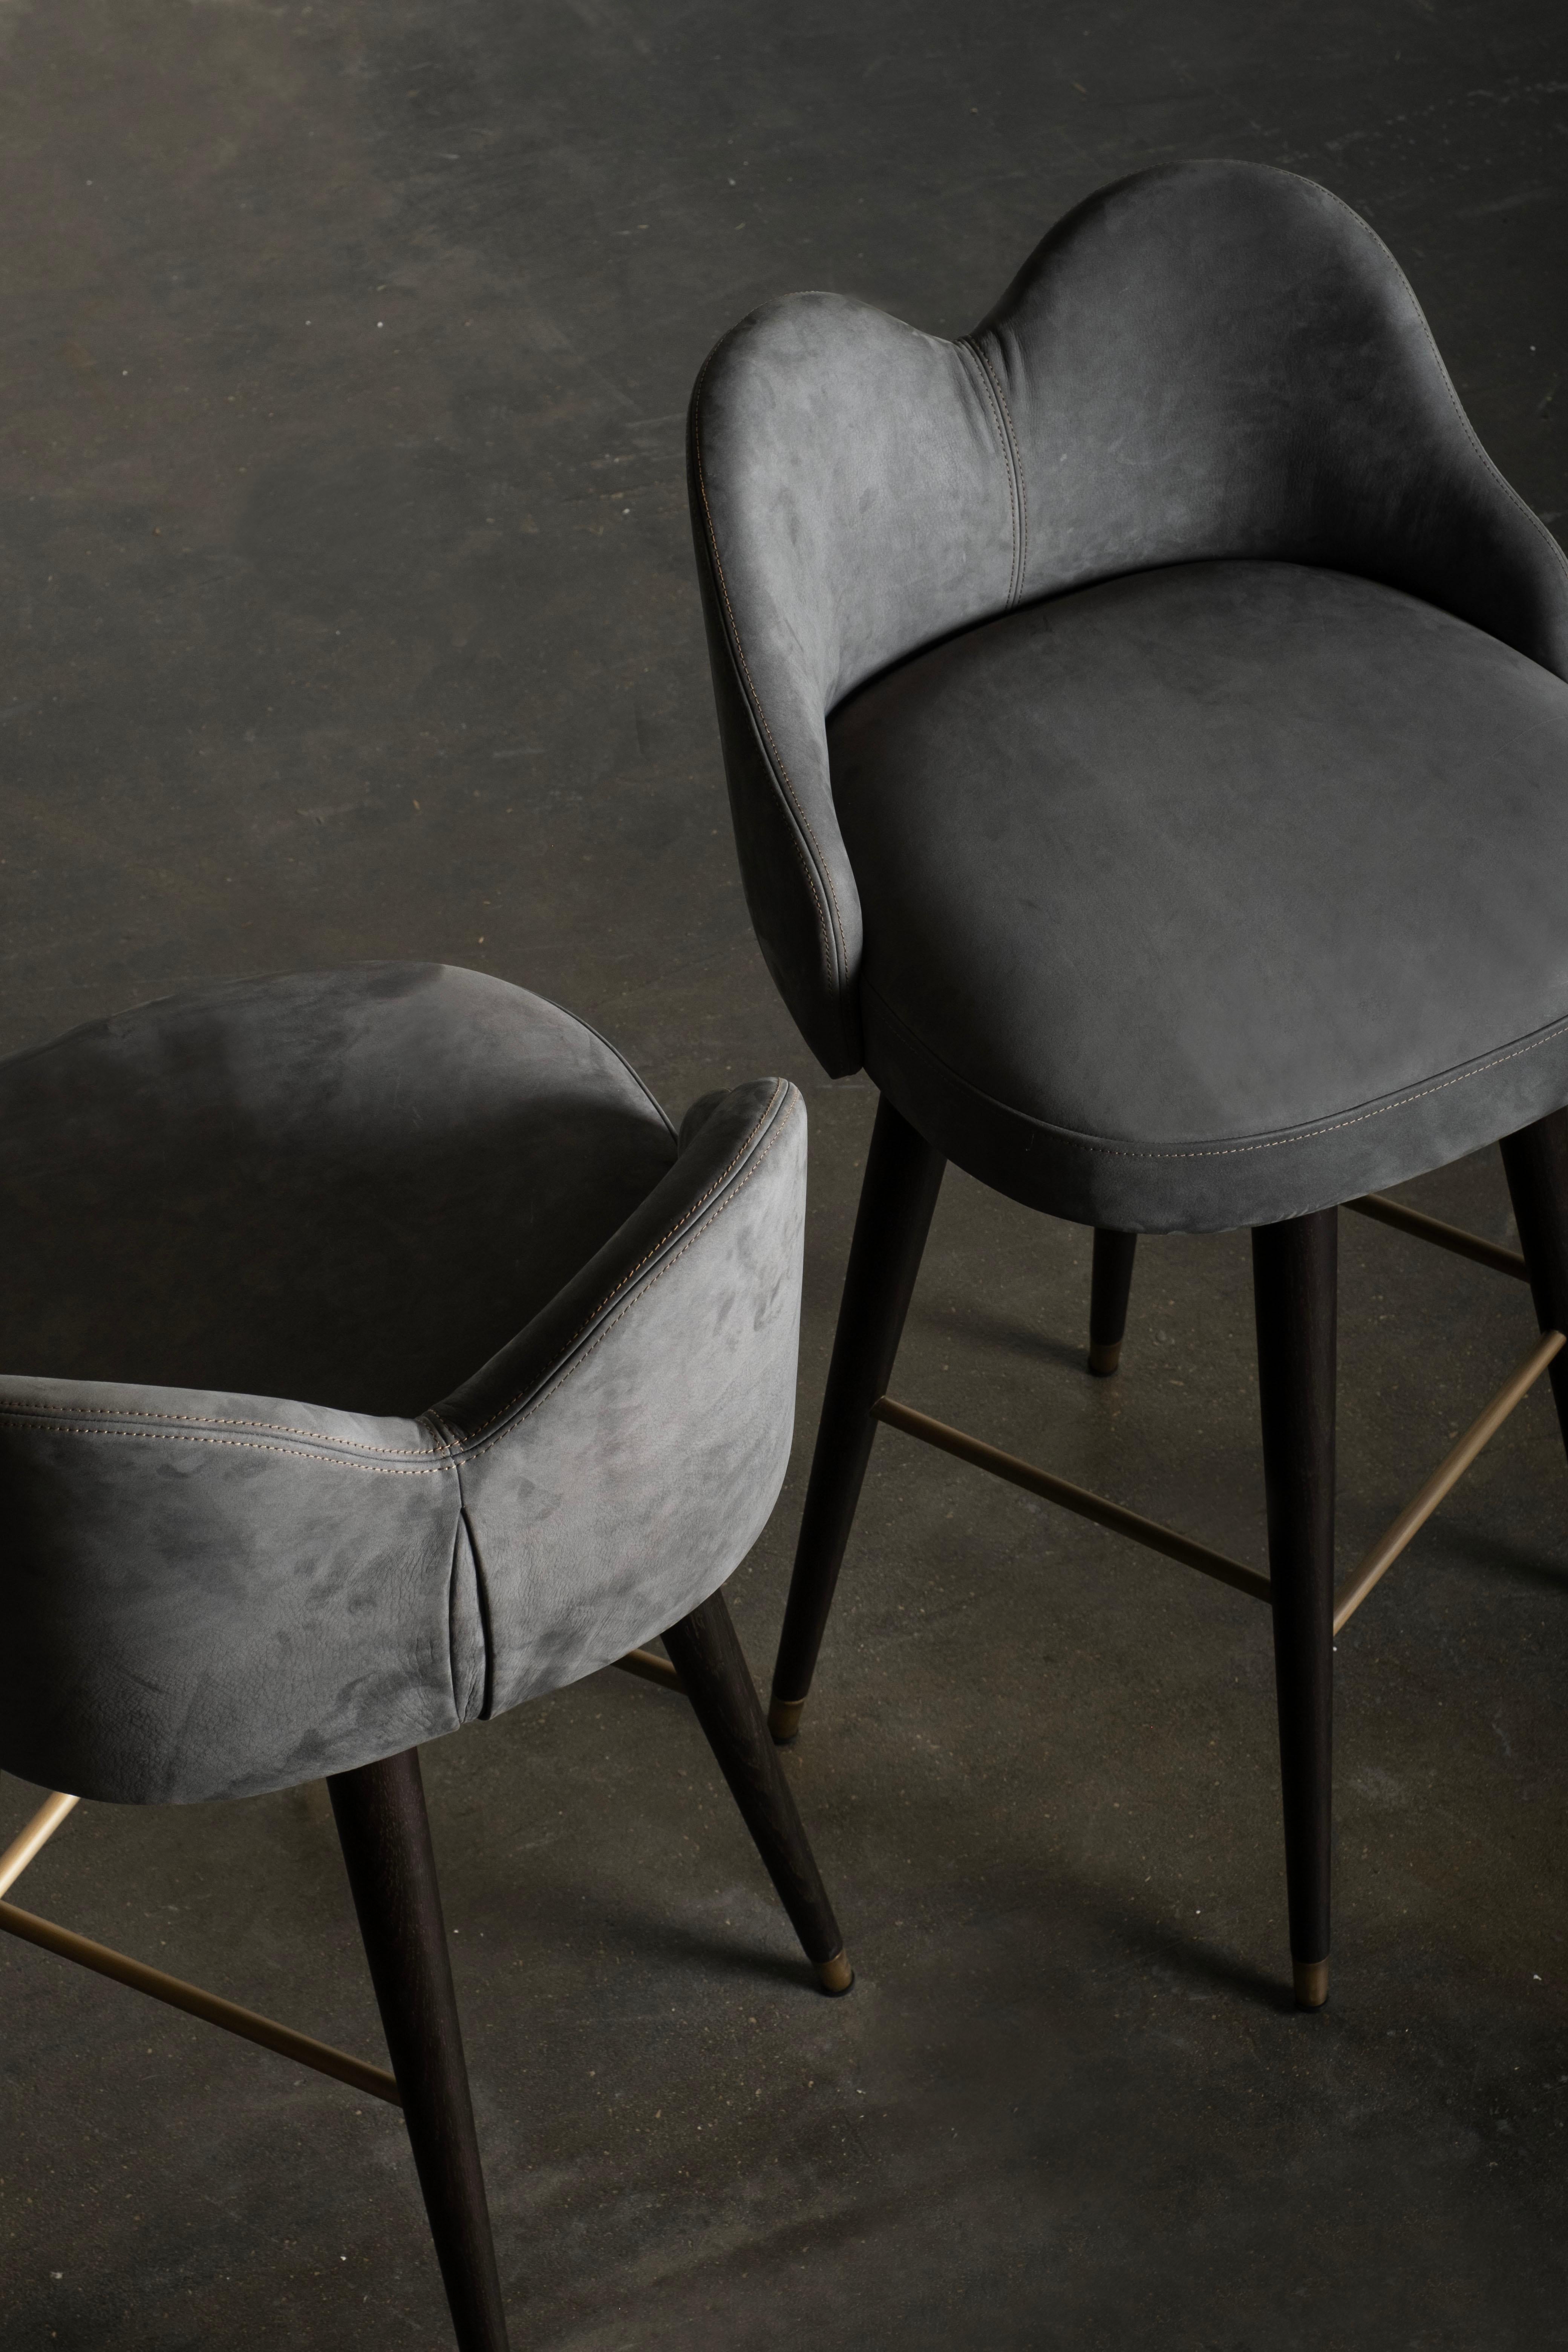 Mary Swivel Bar Stool, Contemporary Collection, Handcrafted in Portugal - Europe by Greenapple.

Designed by Rute Martins for the Contemporary Collection, the Mary bar stool transcends the ordinary through its modern design and fine craftsmanship.